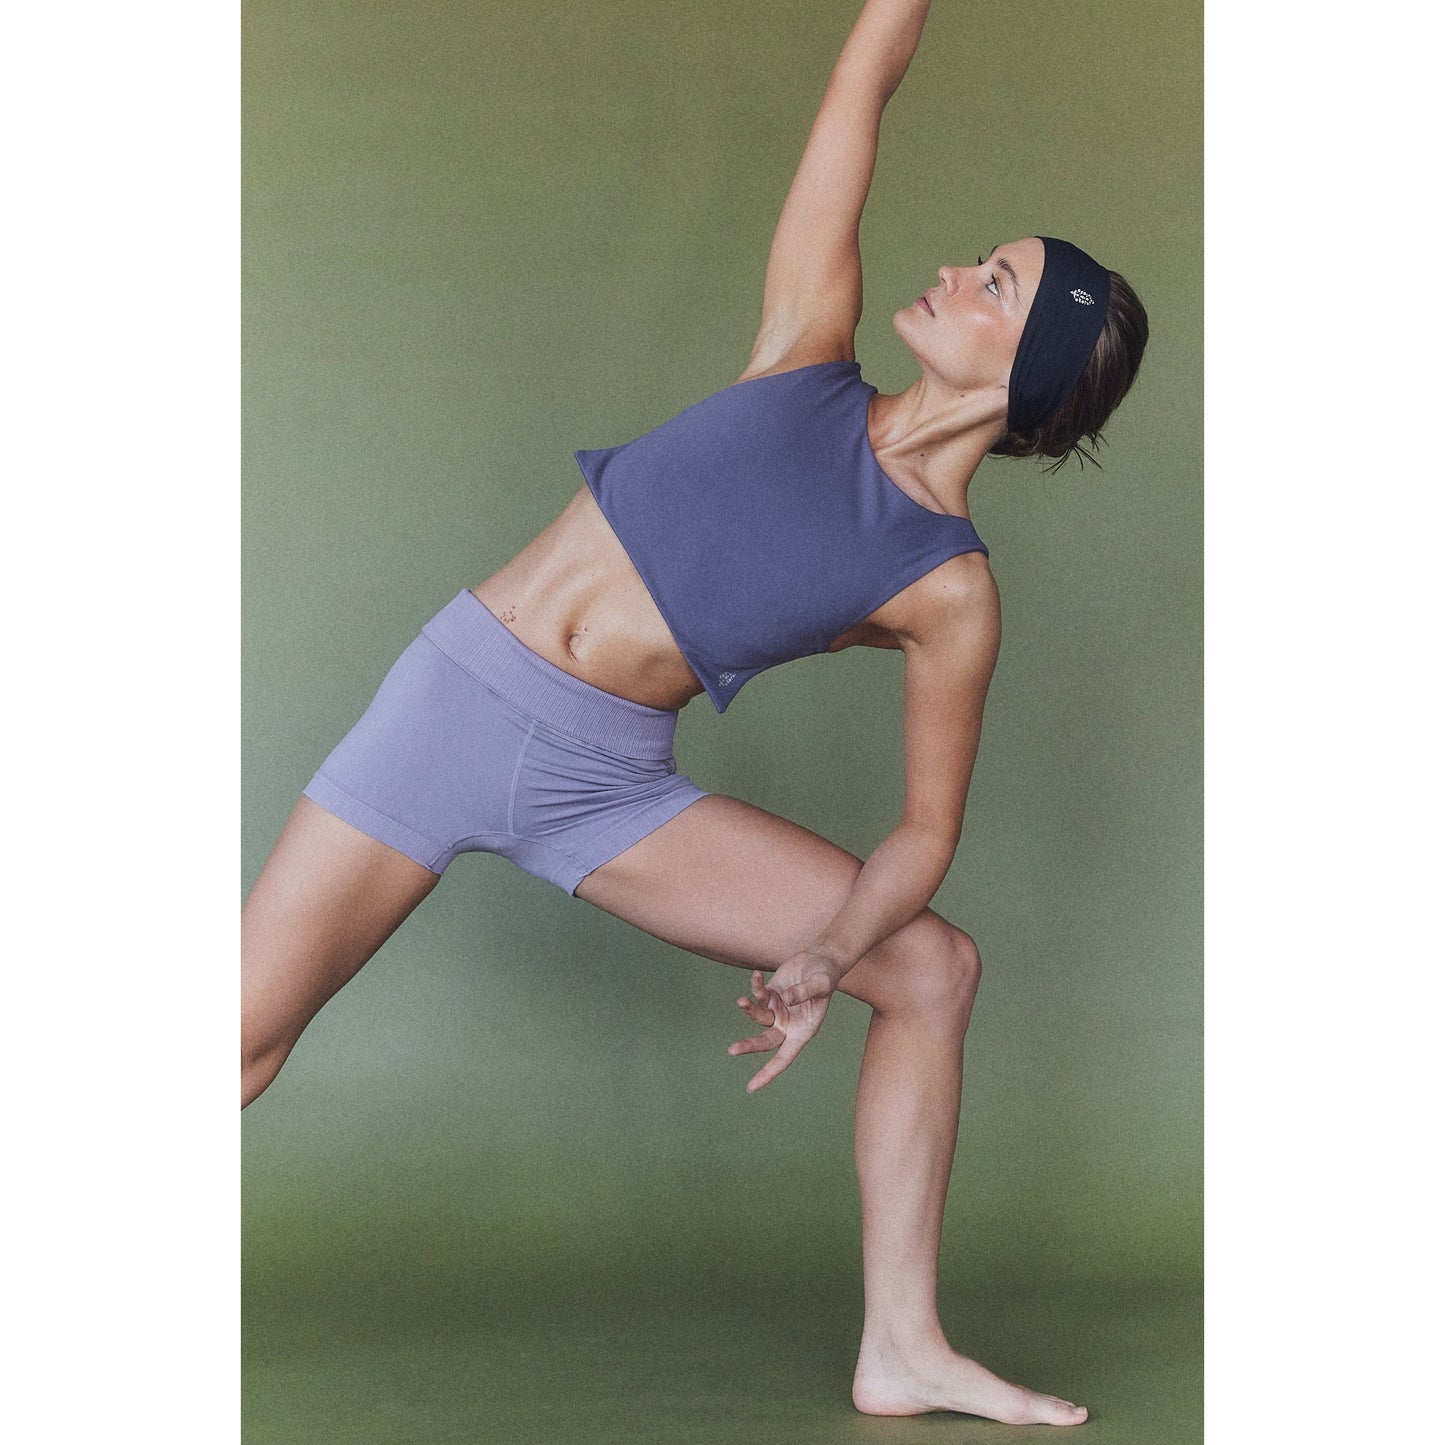 A woman in a Free People Movement Be Right Back Cami in Purple and shorts, featuring a strappy open back, performs a dynamic yoga pose against a green background.